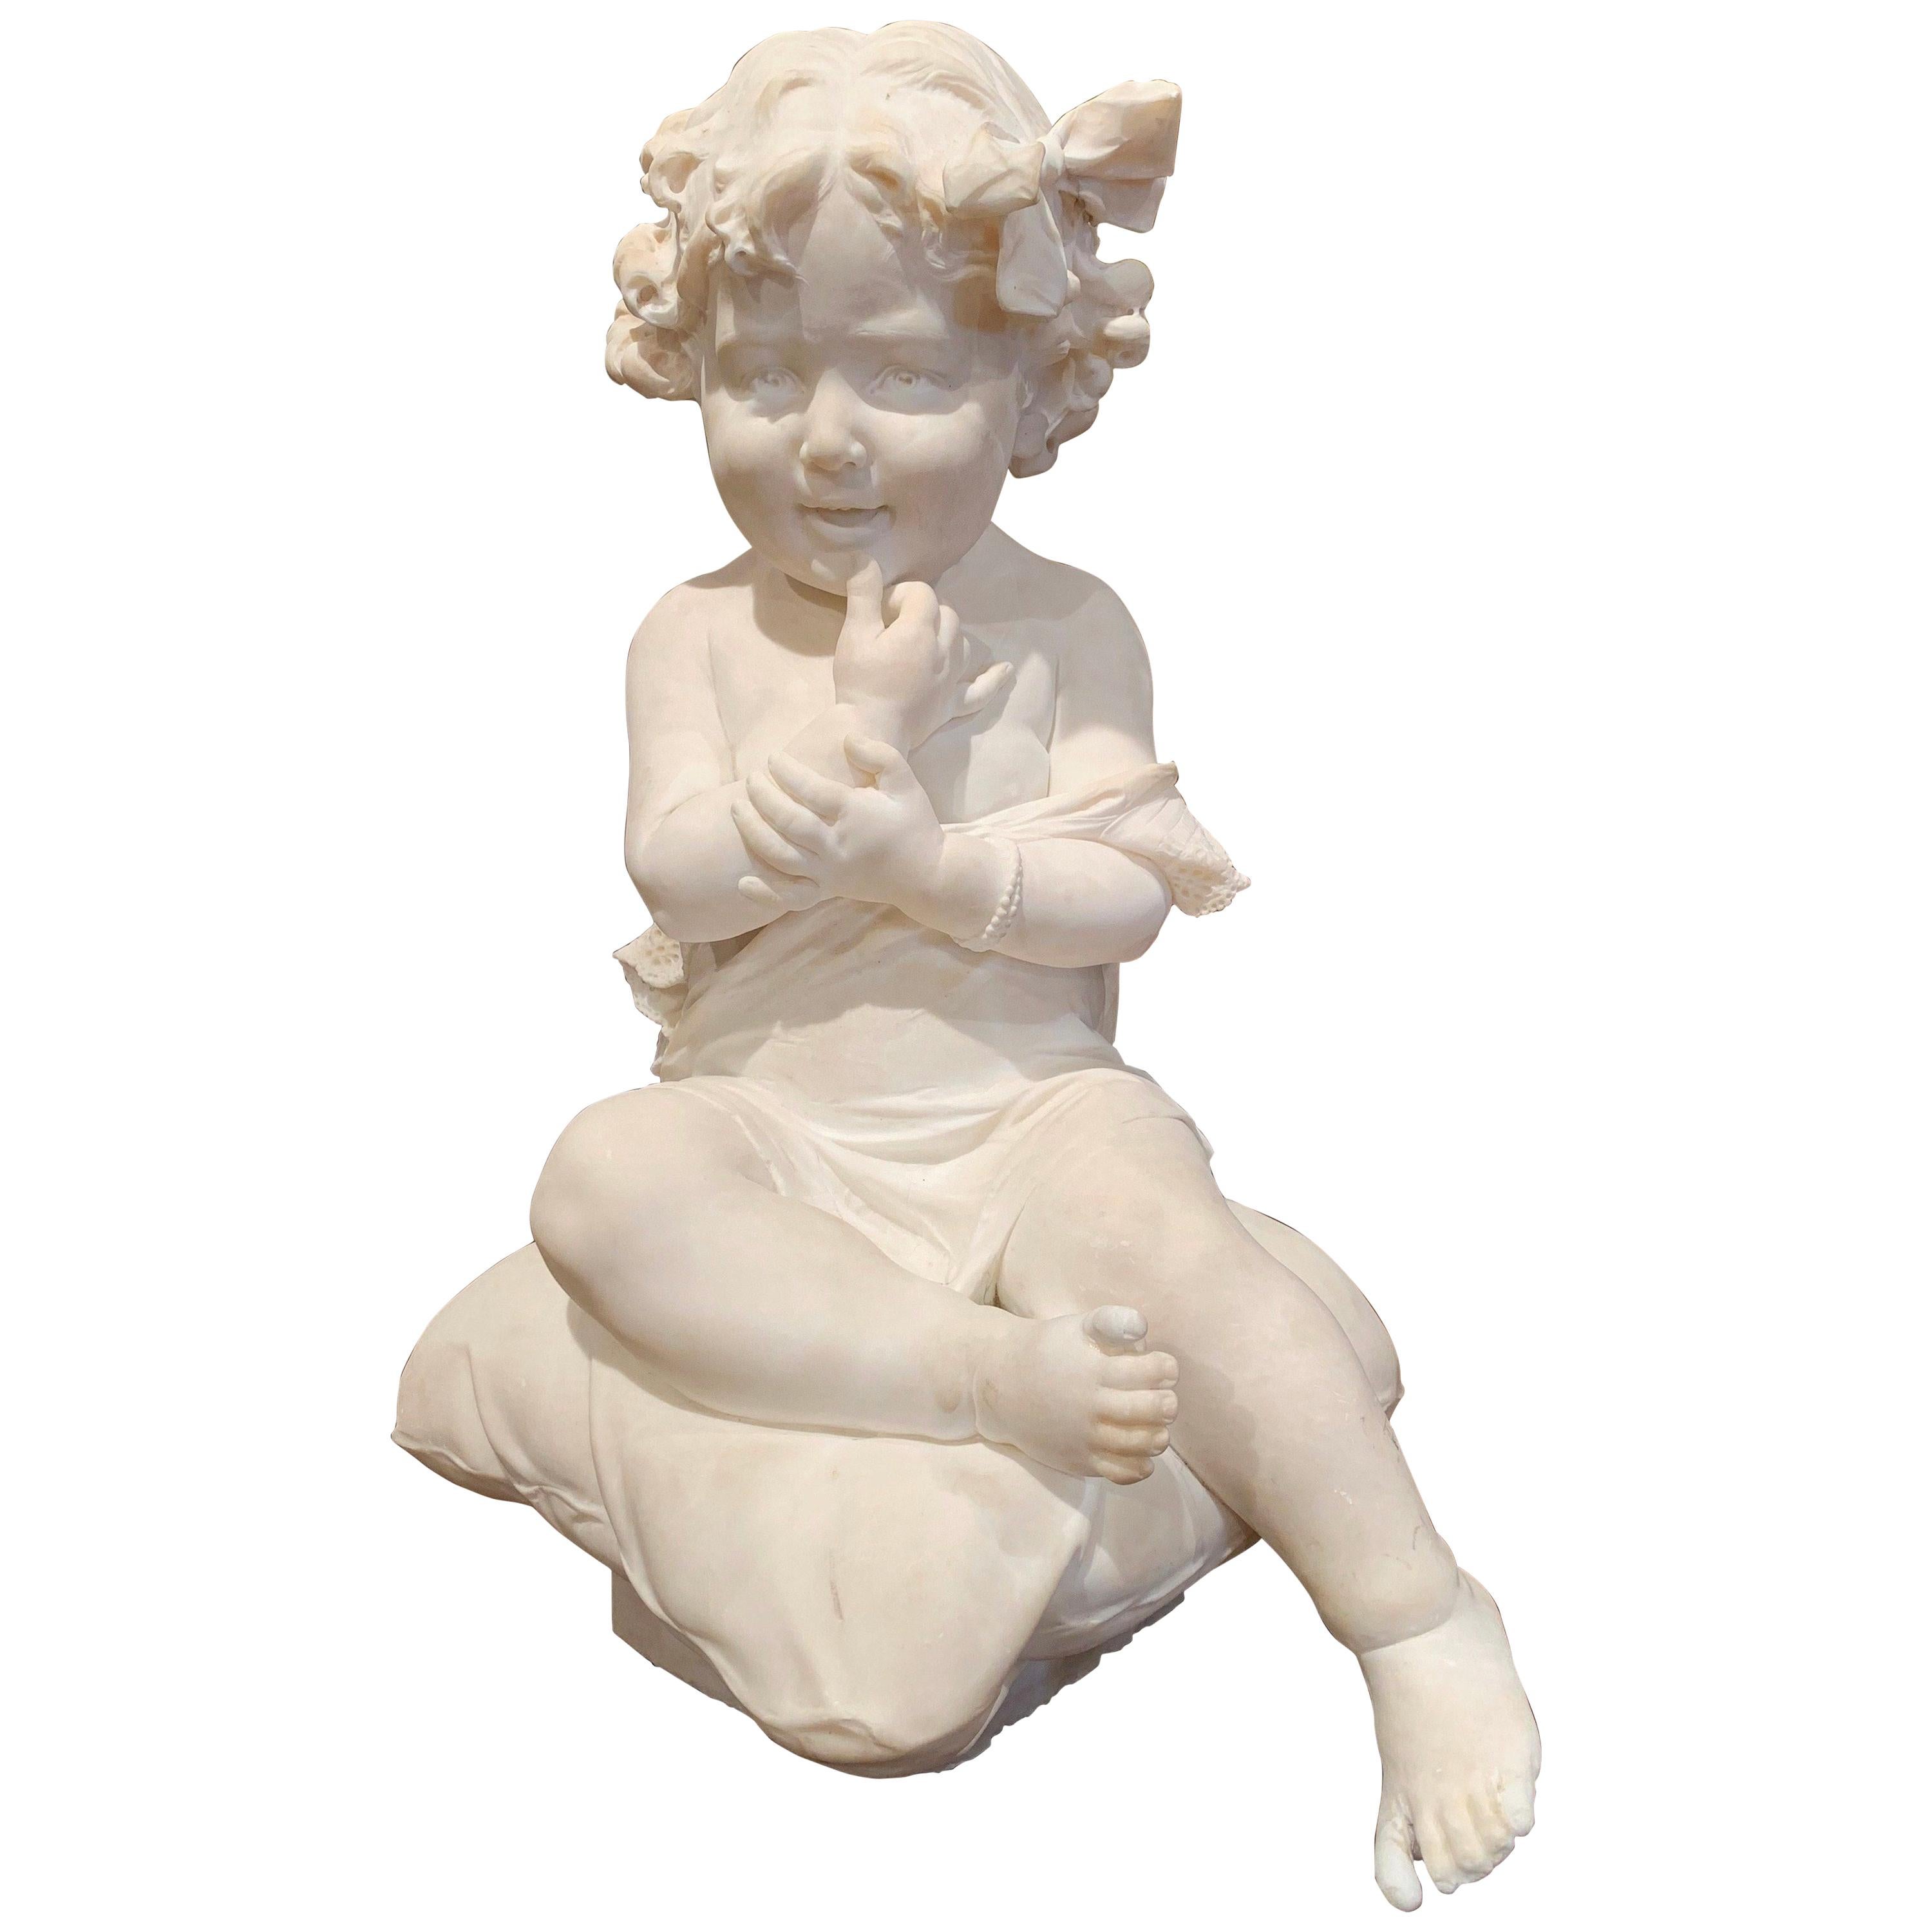 This large antique marble composition was crafted in France, circa 1870. The sculpture features a smiling young girl sited on a cushion and her arms raised and holding her chin. The carved art work shows exquisite detailed craftsmanship from her